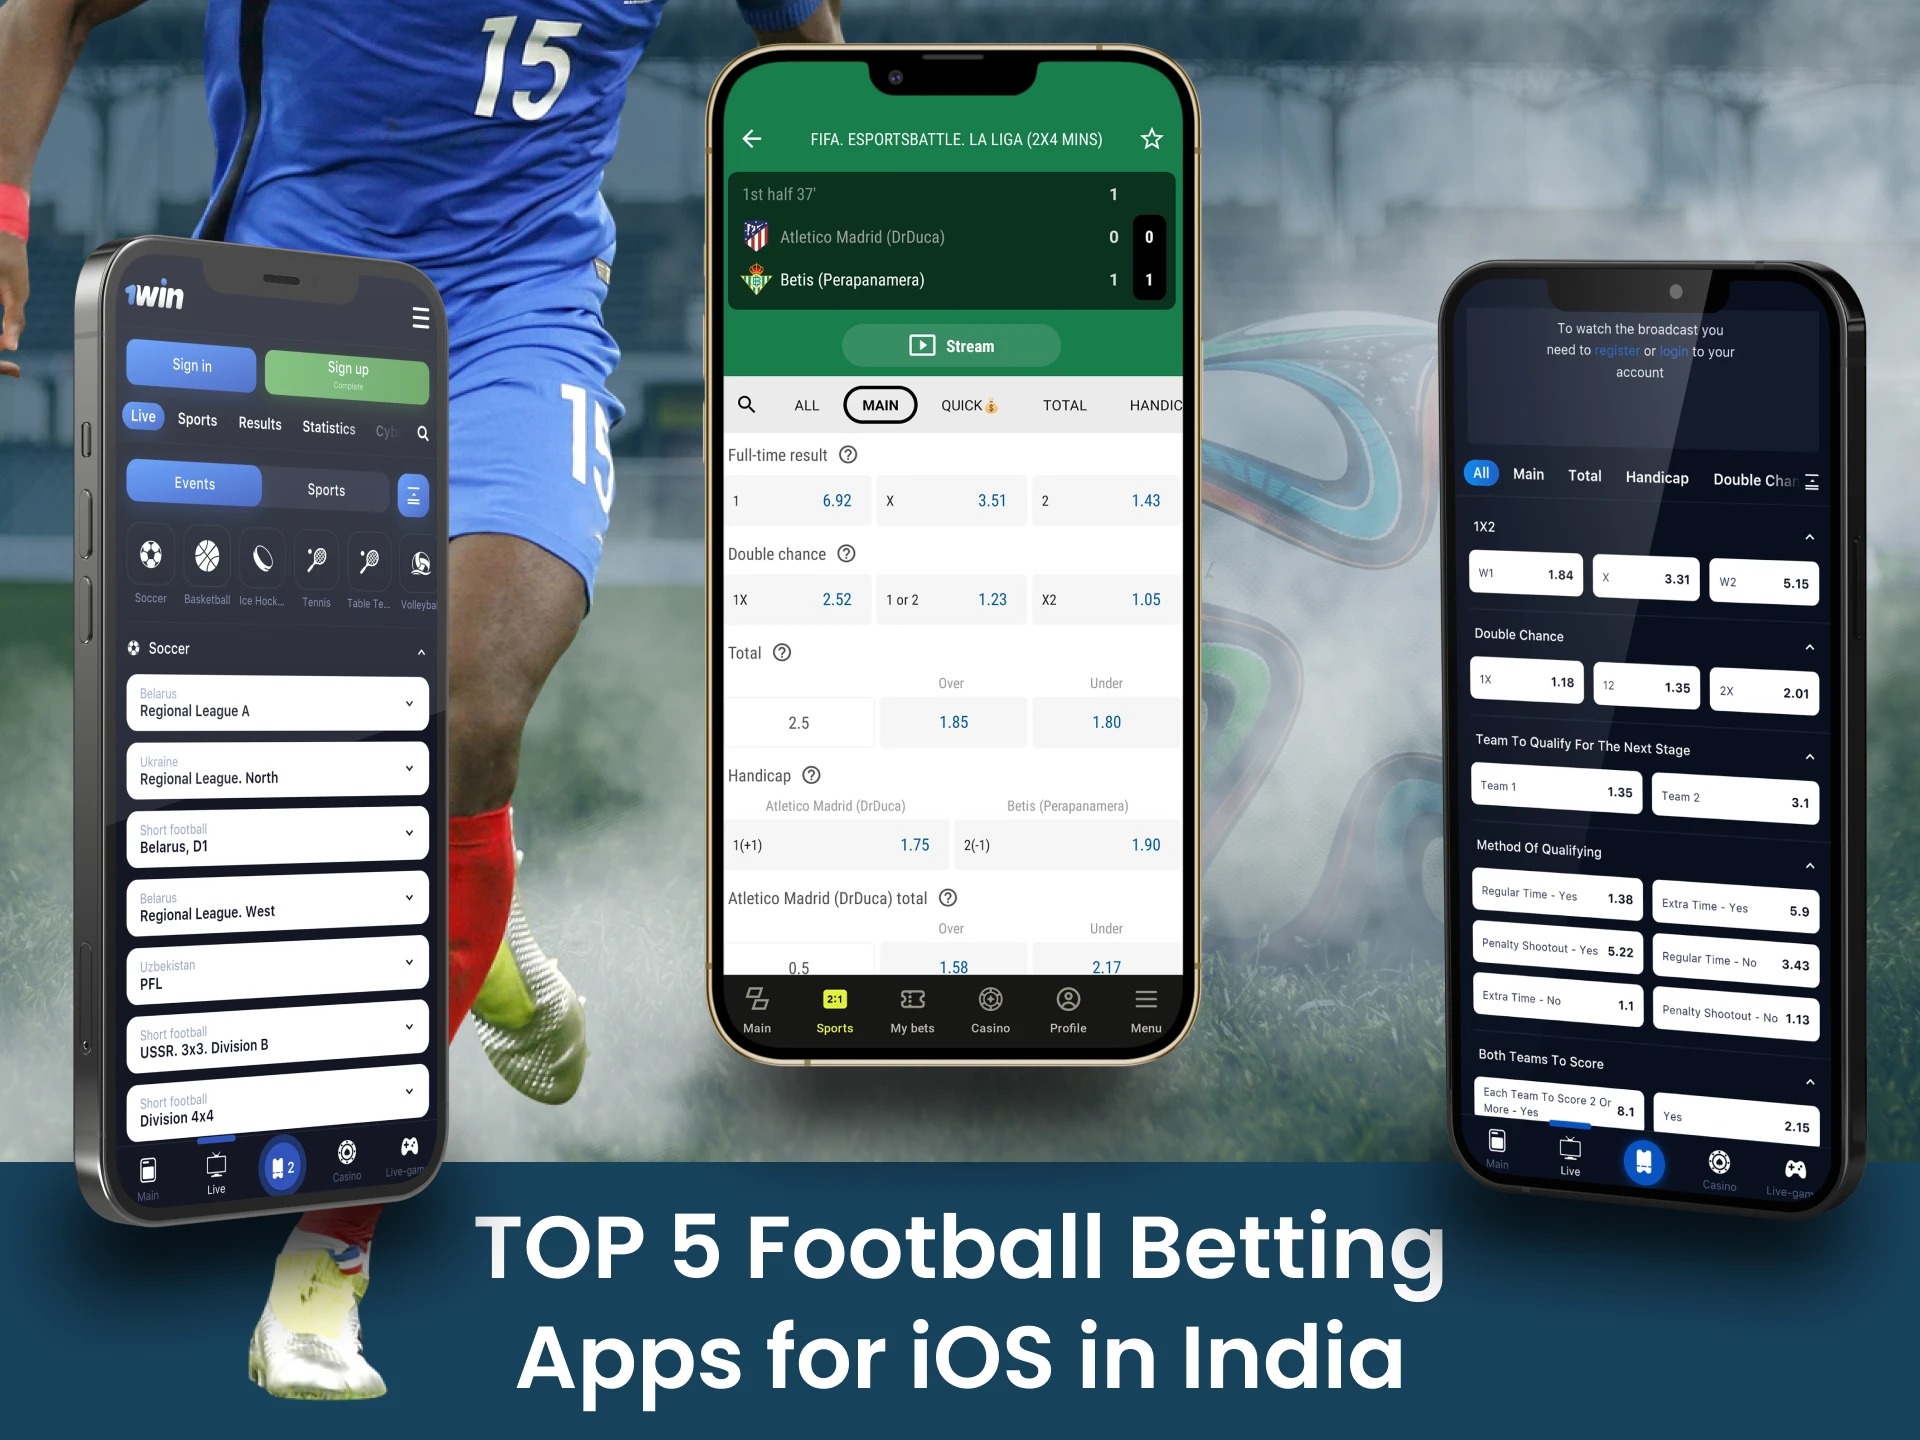 Download one of these apps on your iPhone for the football betting.